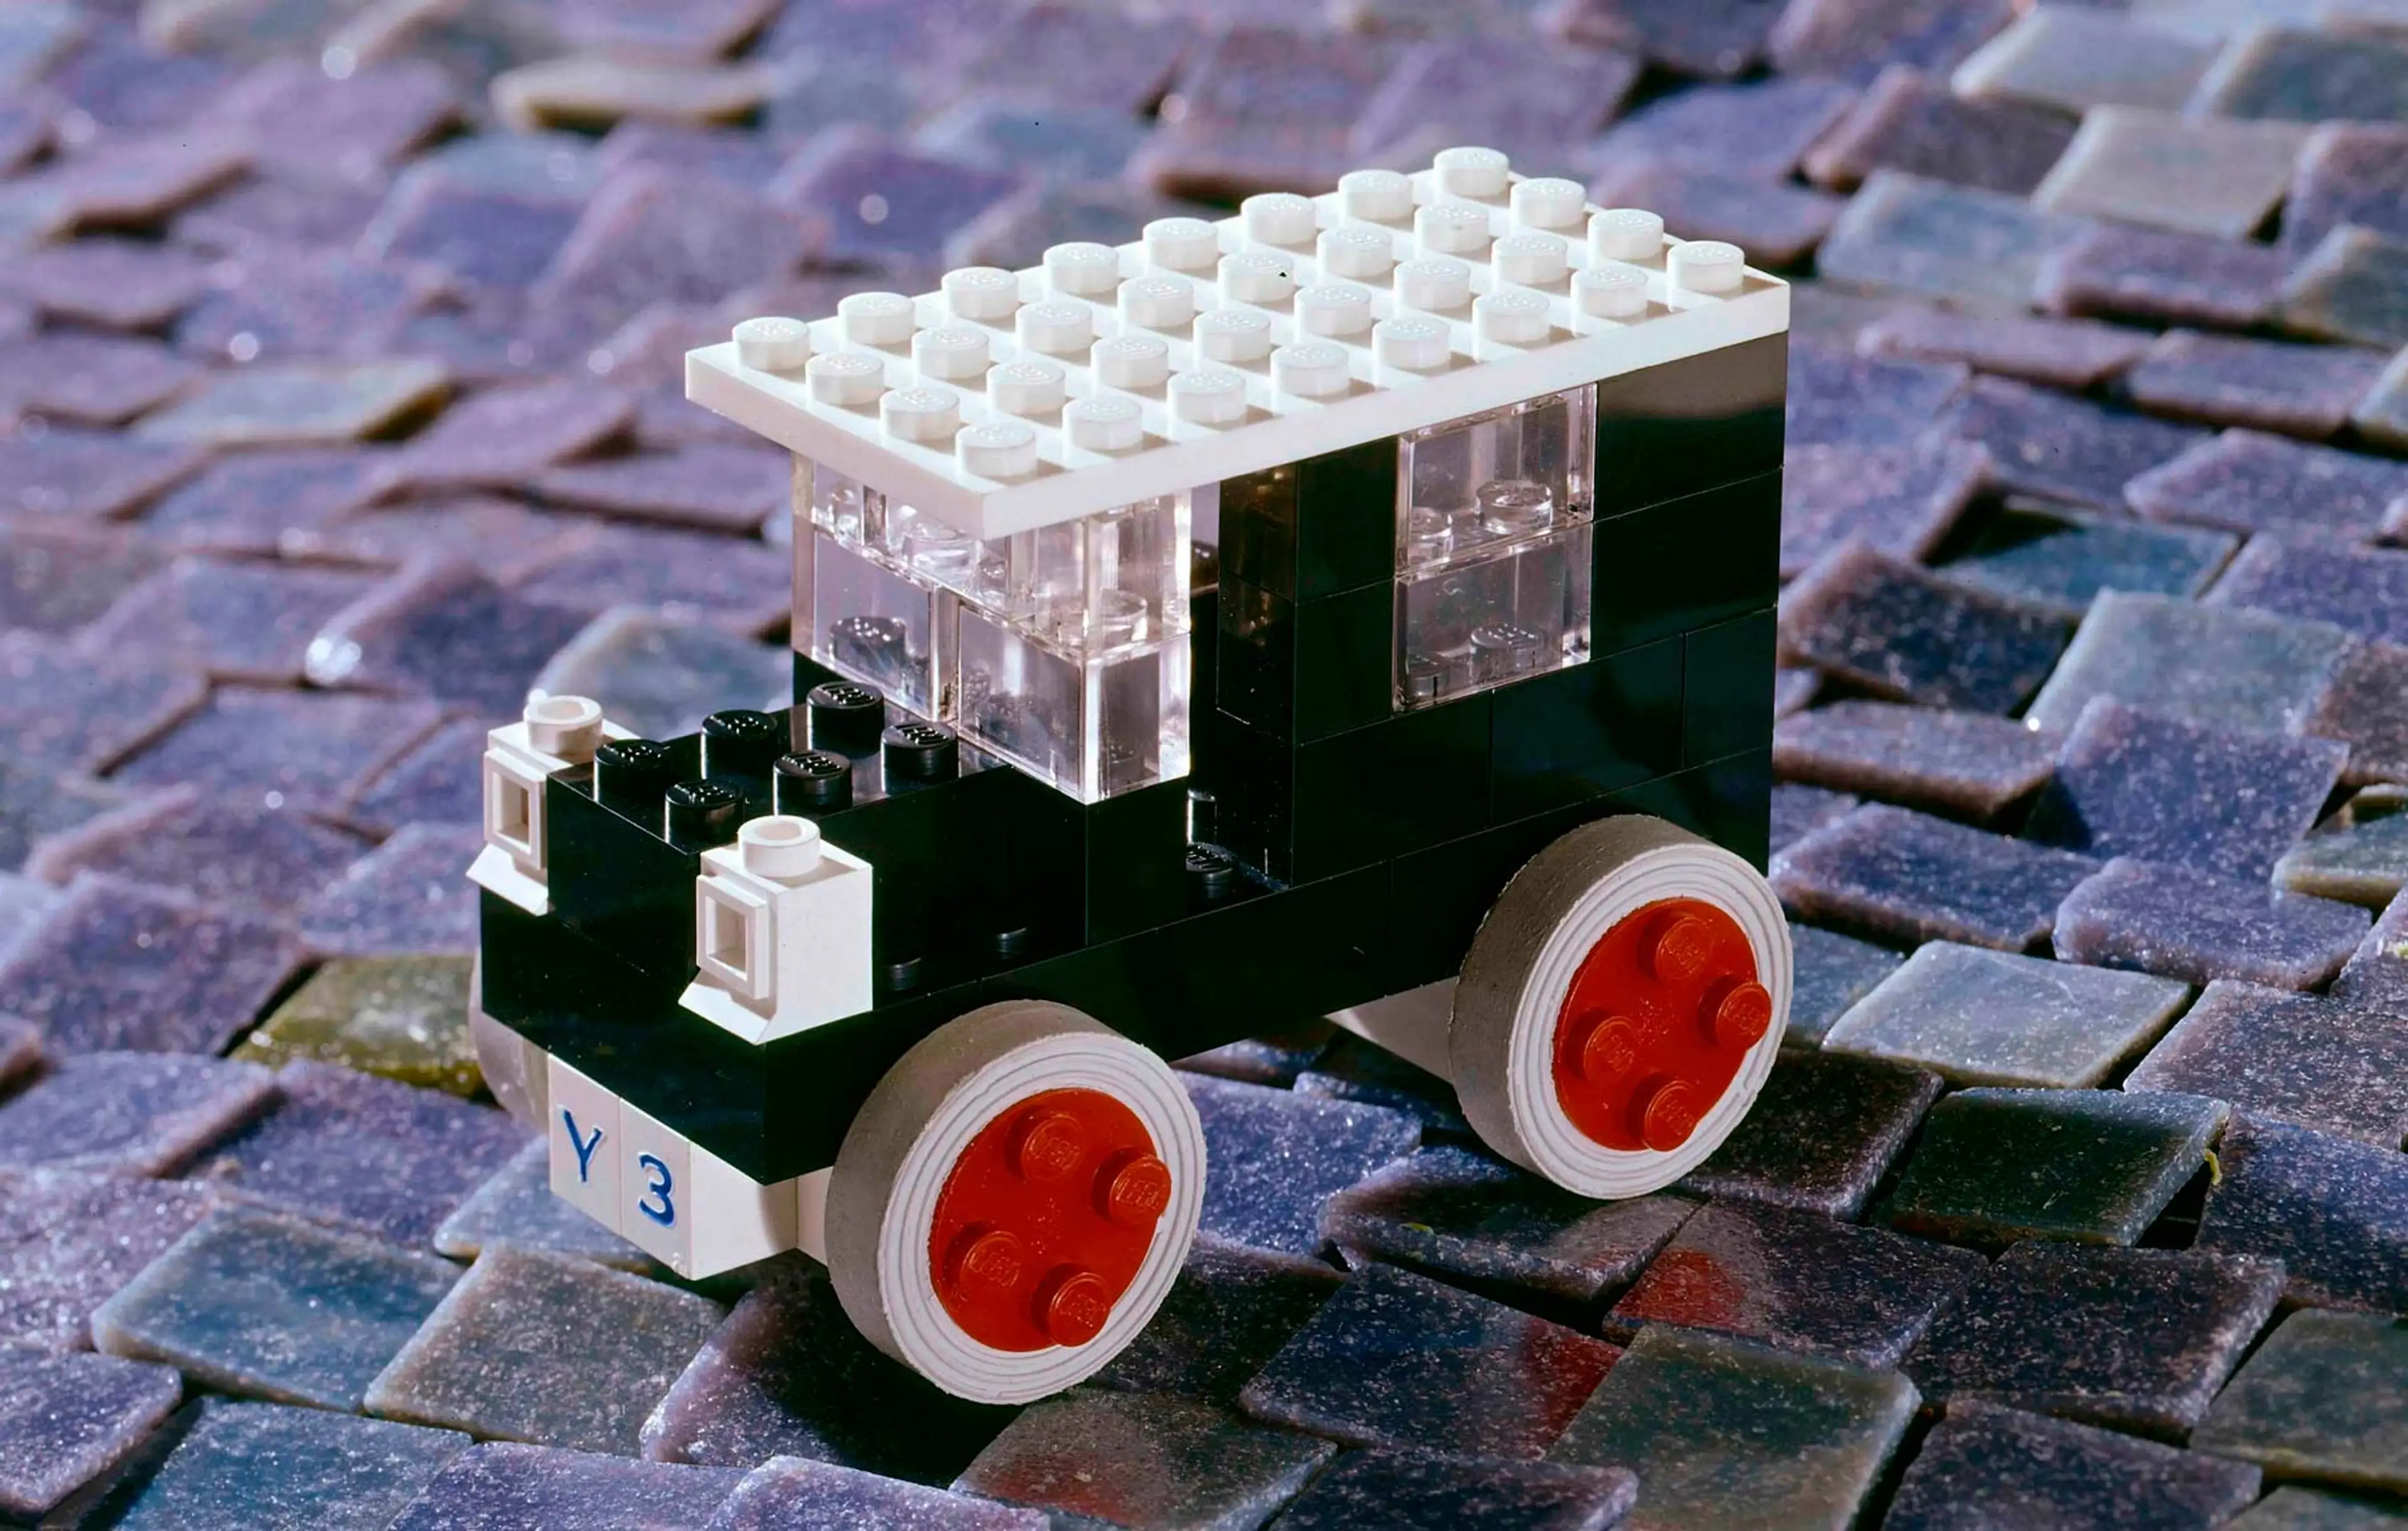 LEGO car from the 1960s